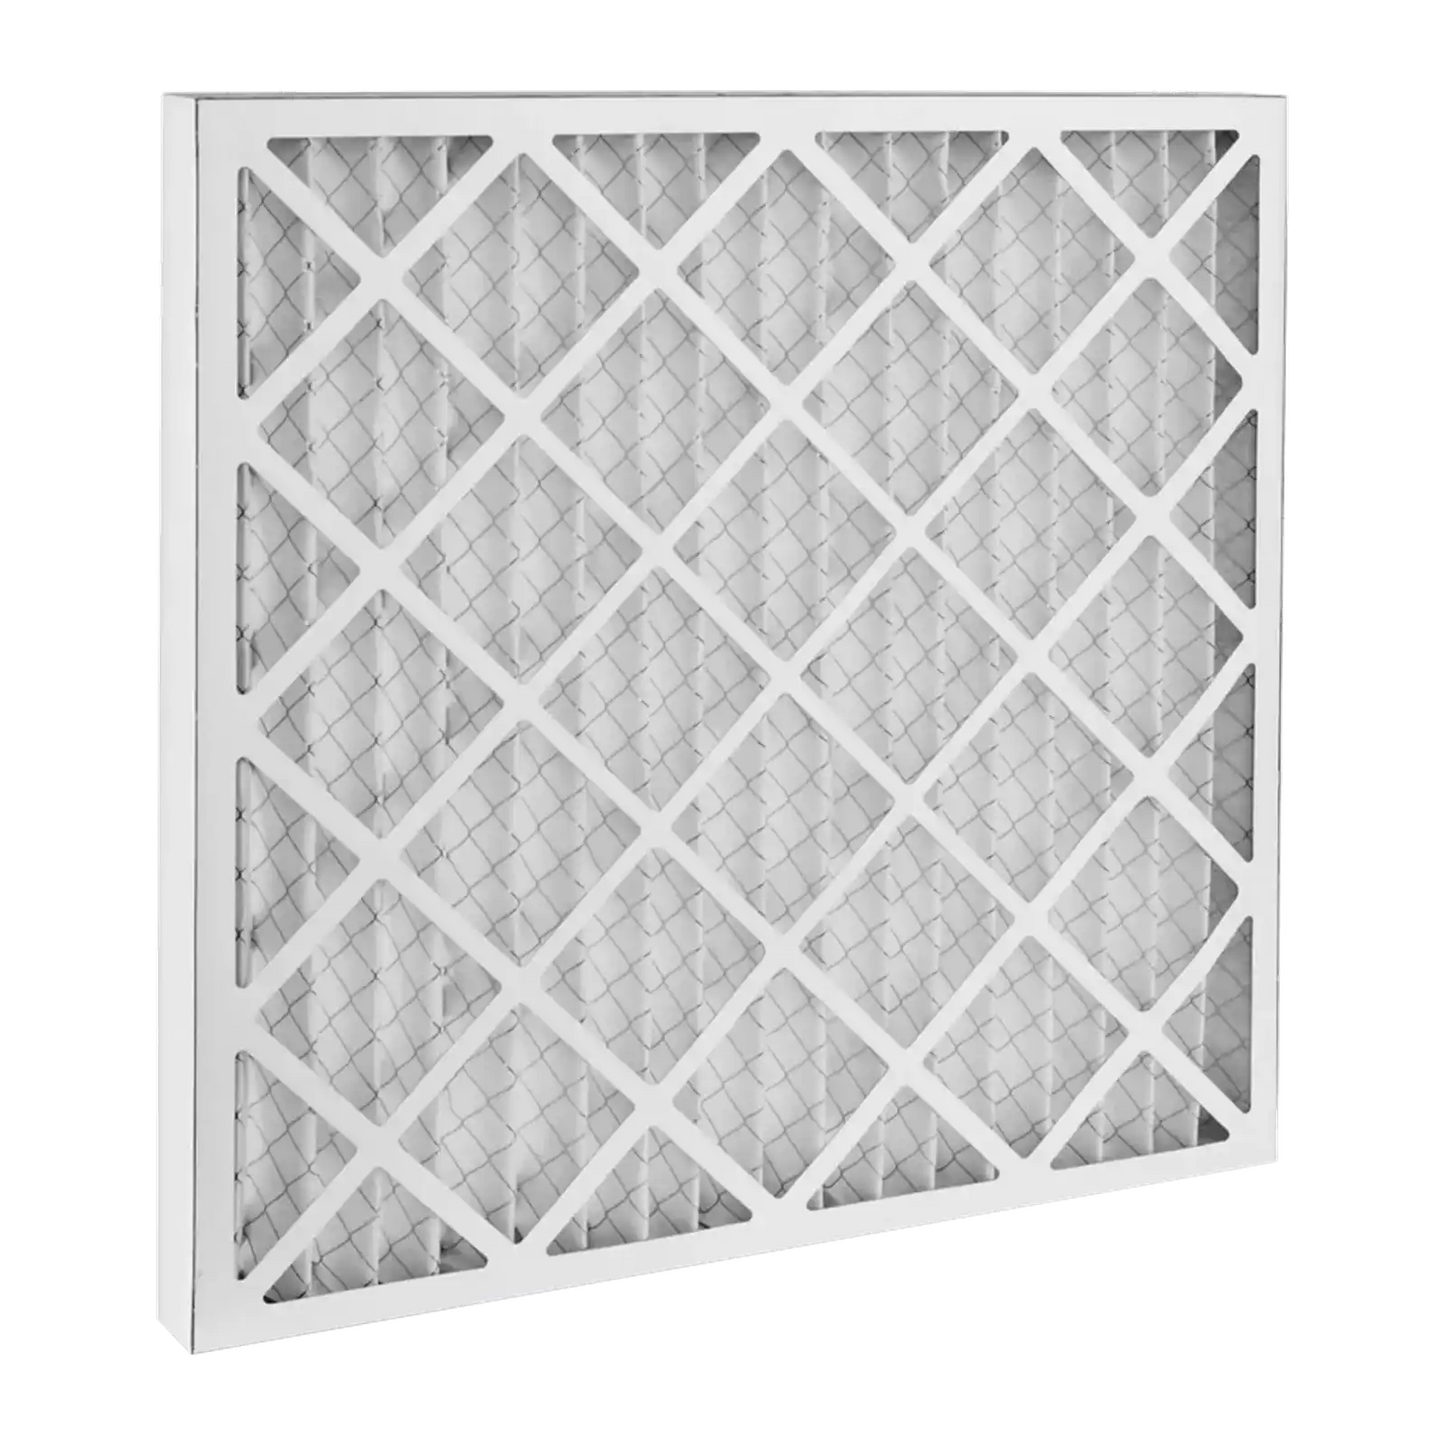 Dafco 20x25x1 Furnace AC Filter - Case of 12